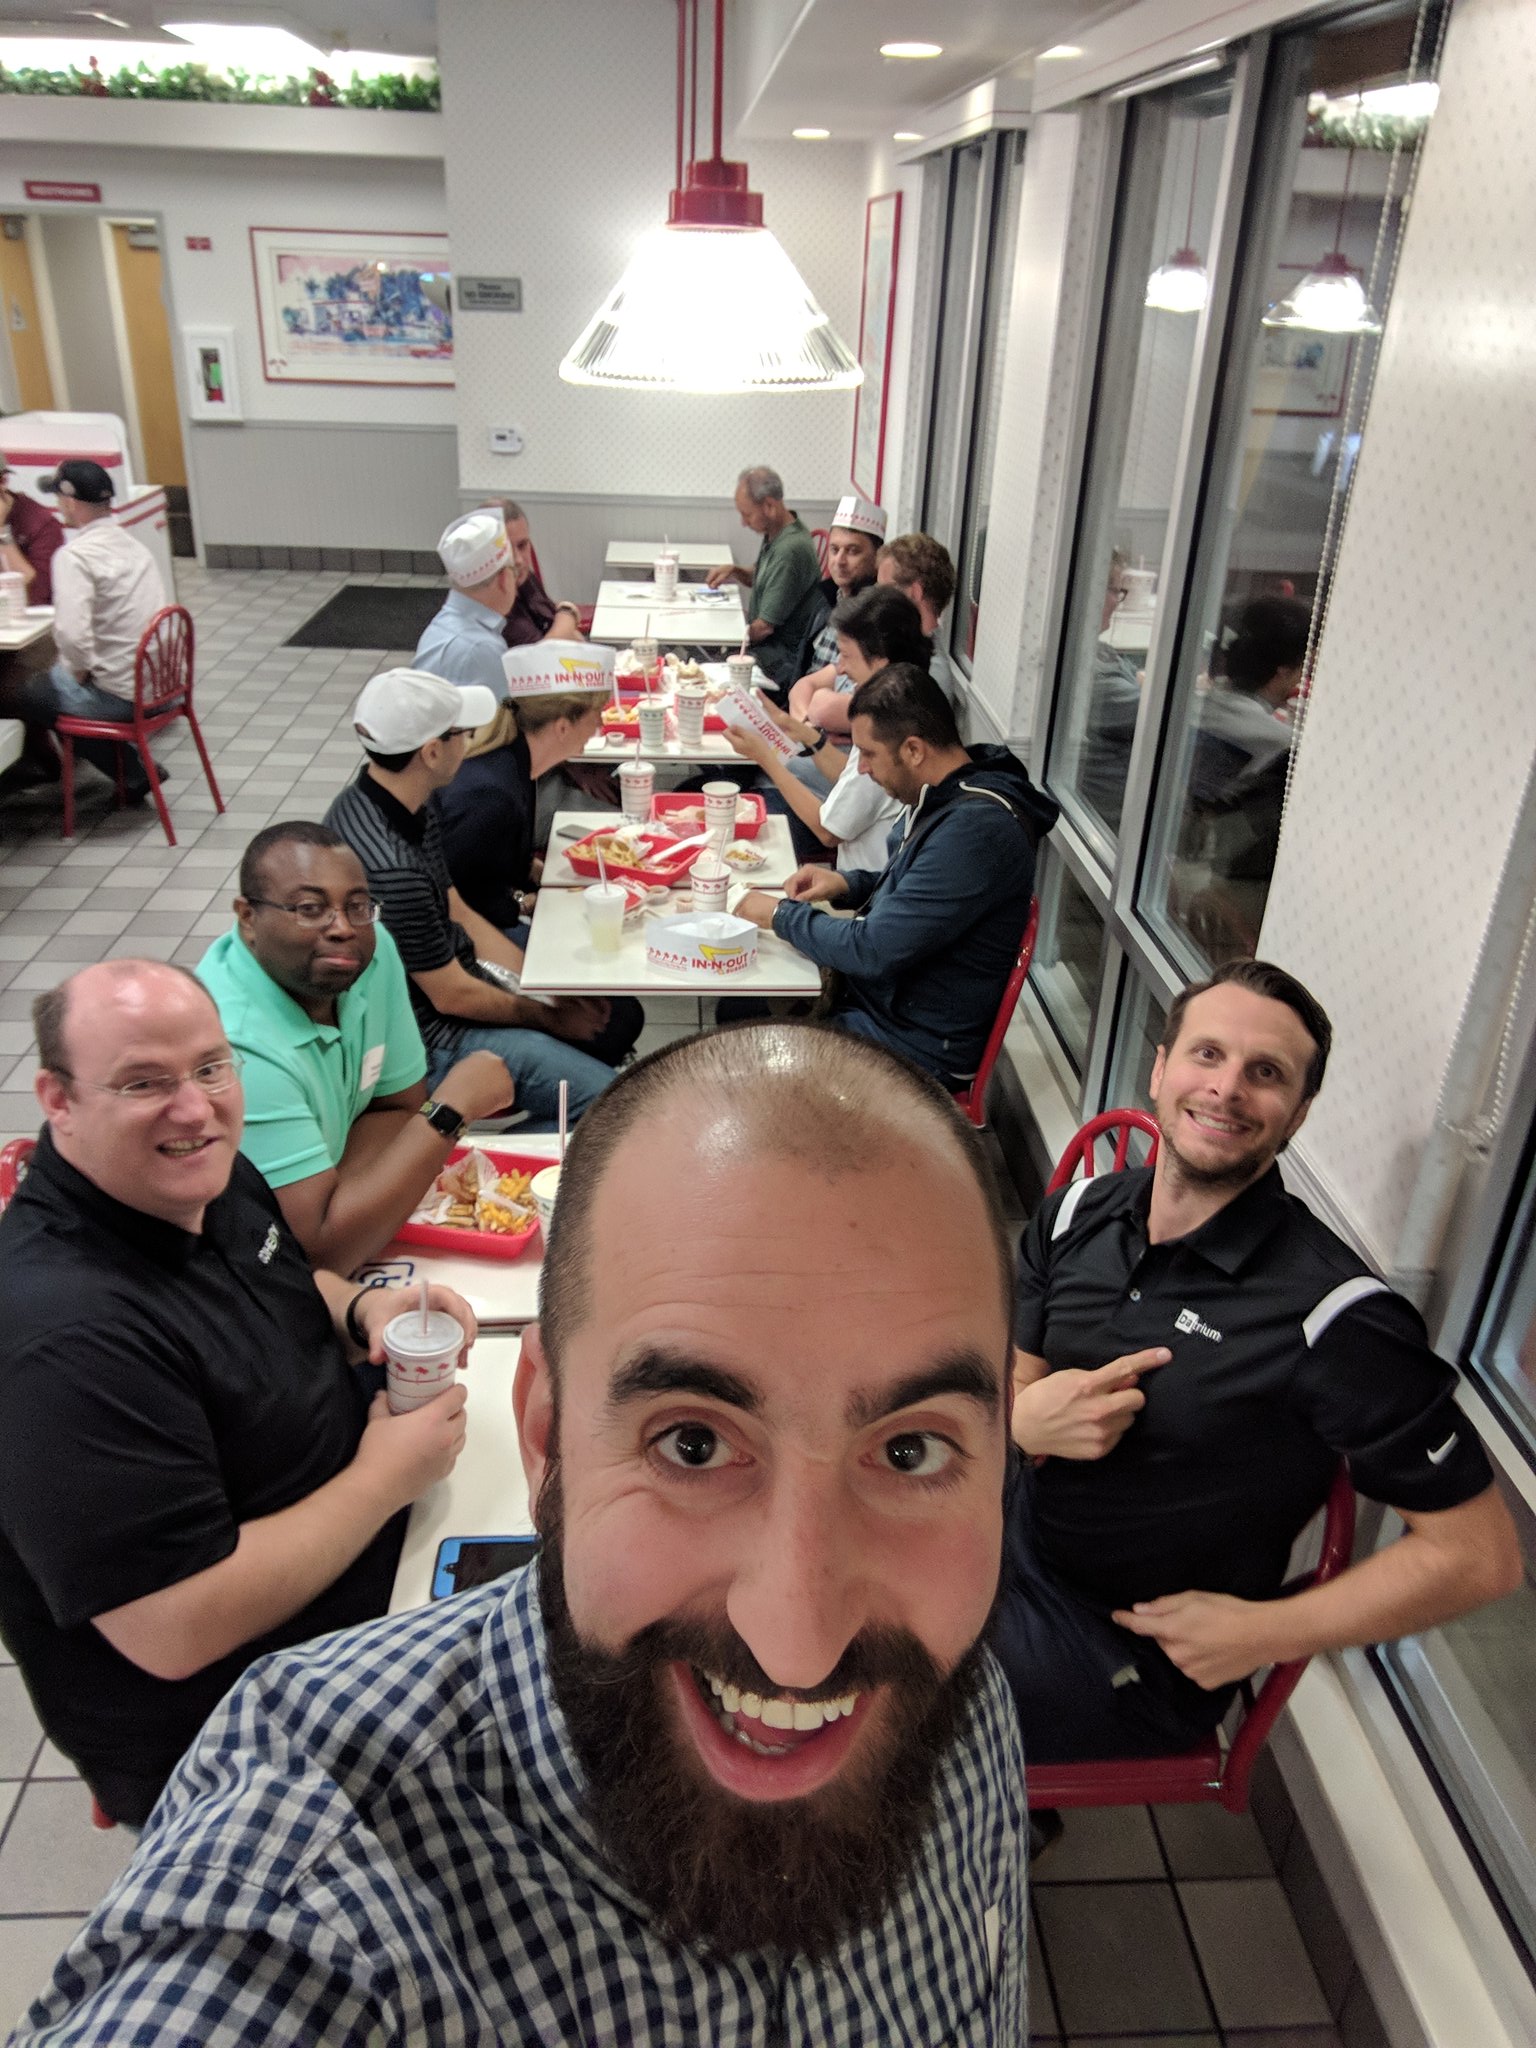 blog/cfd4-in-n-out-burger-group.jpg